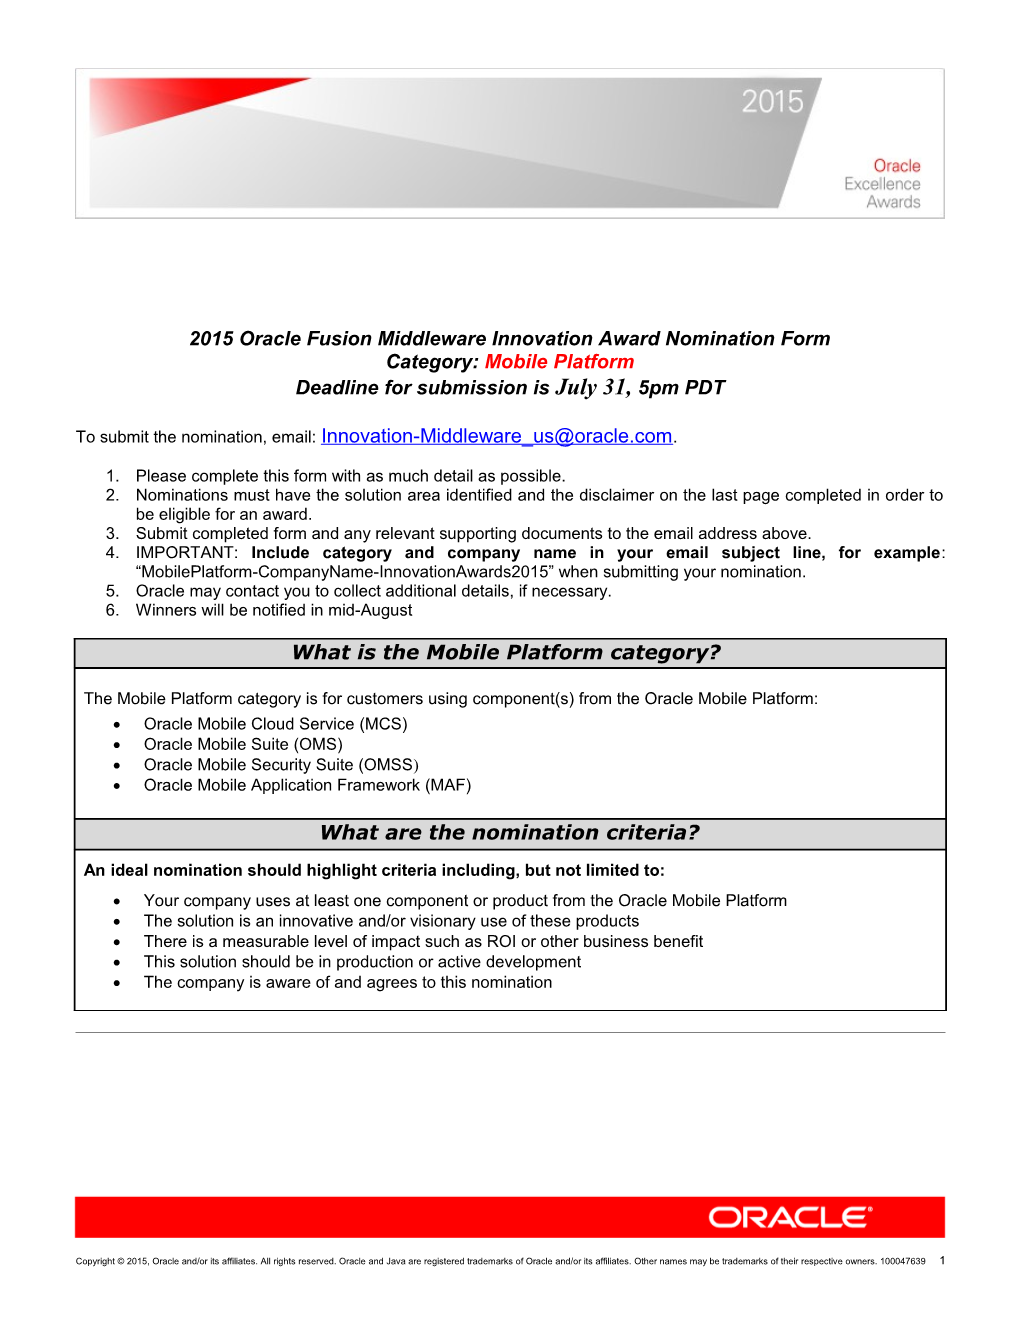 2015 Oracle Fusion Middleware Innovation Award Nomination Form Category: Mobile Platform